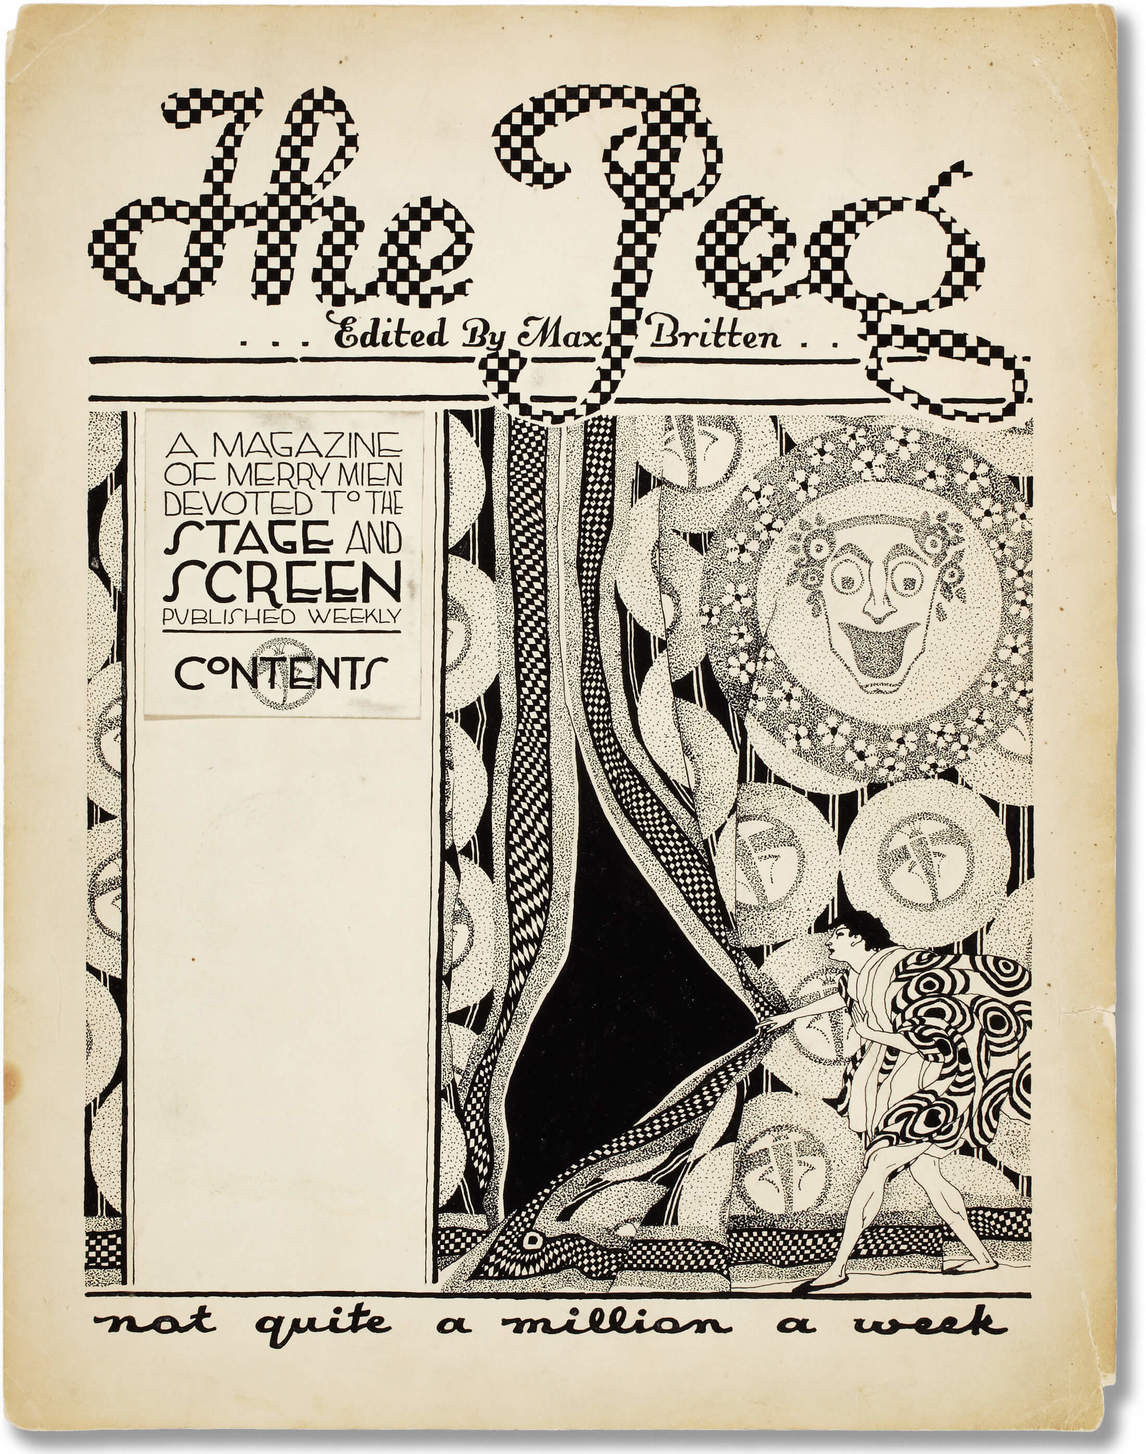 Art Canada Institute, Bertram Brooker, Cover design for The Peg: A Magazine of Merry Mien Devoted to the Stage and Screen, c.1915–21